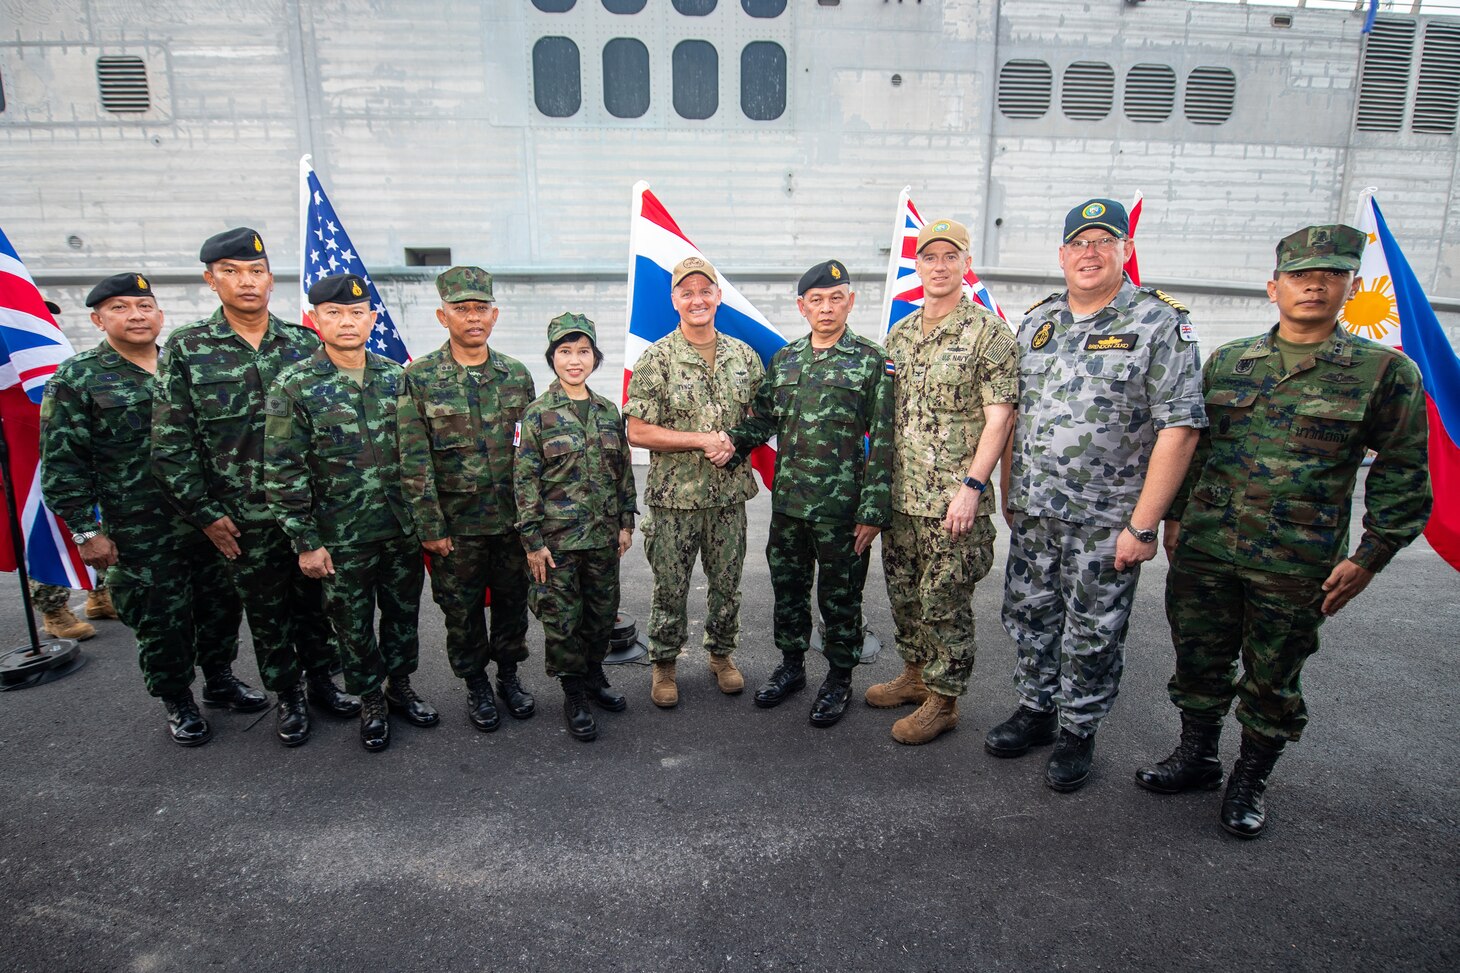 190525-N-AZ808-2094

SATTAHIP, Thailand (May 25, 2019) – Distinguished guests pose for a group photo following the Pacific Partnership 2019 (PP19) closing ceremony for Thailand. Thailand is the final mission stop for PP19. Pacific Partnership, now in its 14th iteration, is the largest annual multinational humanitarian assistance and disaster relief preparedness mission conducted in the Indo-Pacific. Each year the mission team works collectively with host and partner nations to enhance regional interoperability and disaster response capabilities, increase security and stability in the region, and foster new and enduring friendships in the Indo-Pacific.